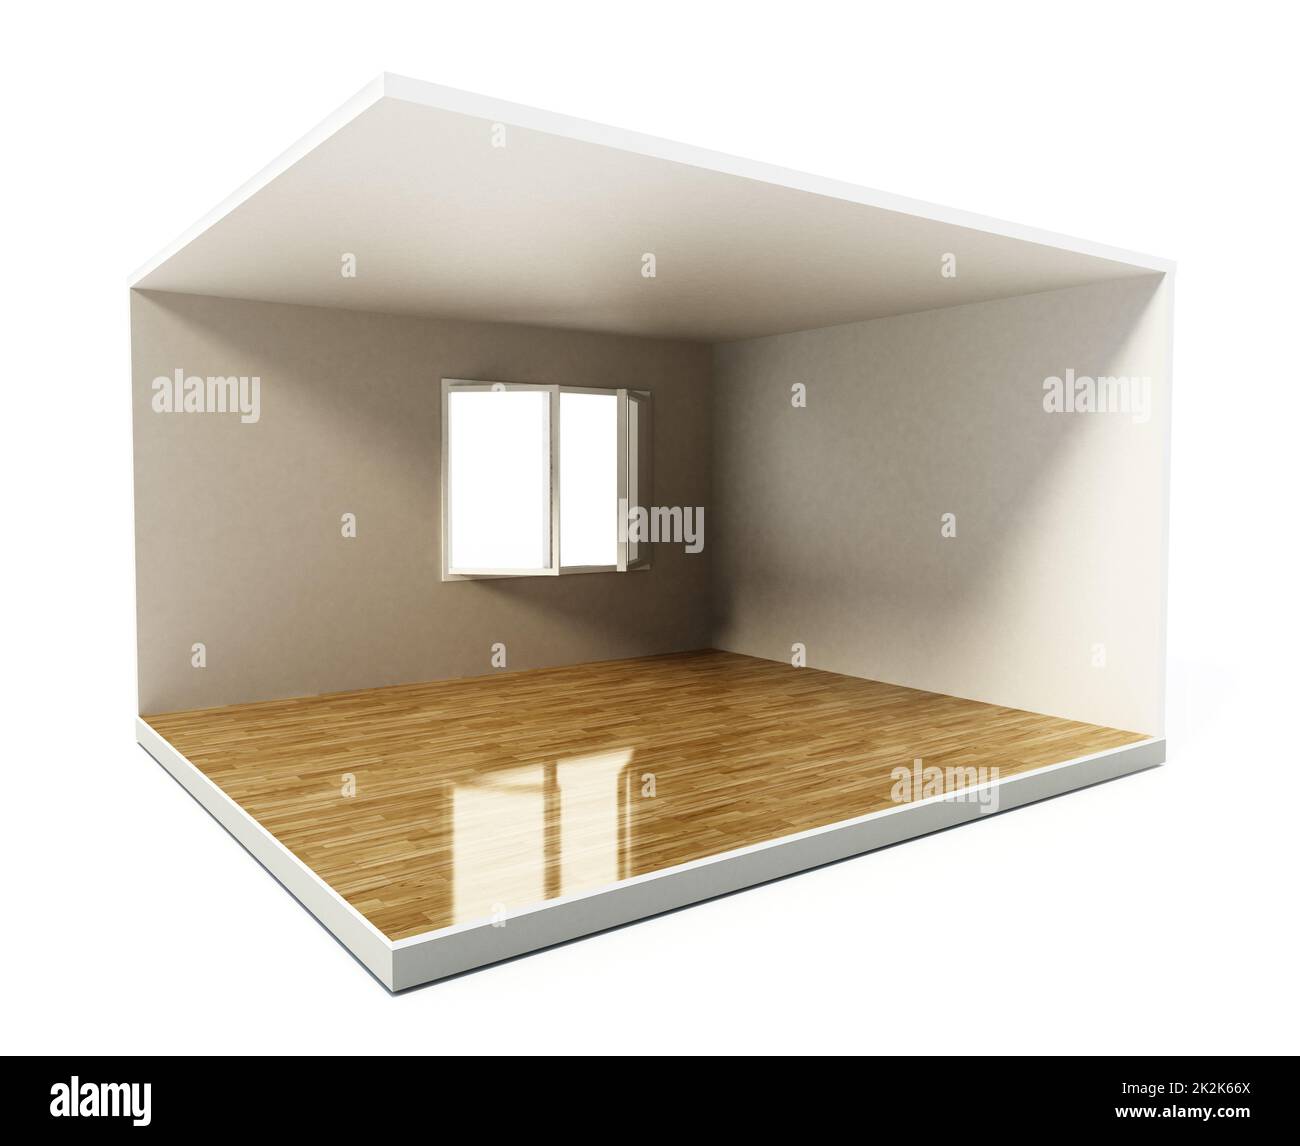 Empty room with white walls and hardwood floor. 3D illustration Stock Photo